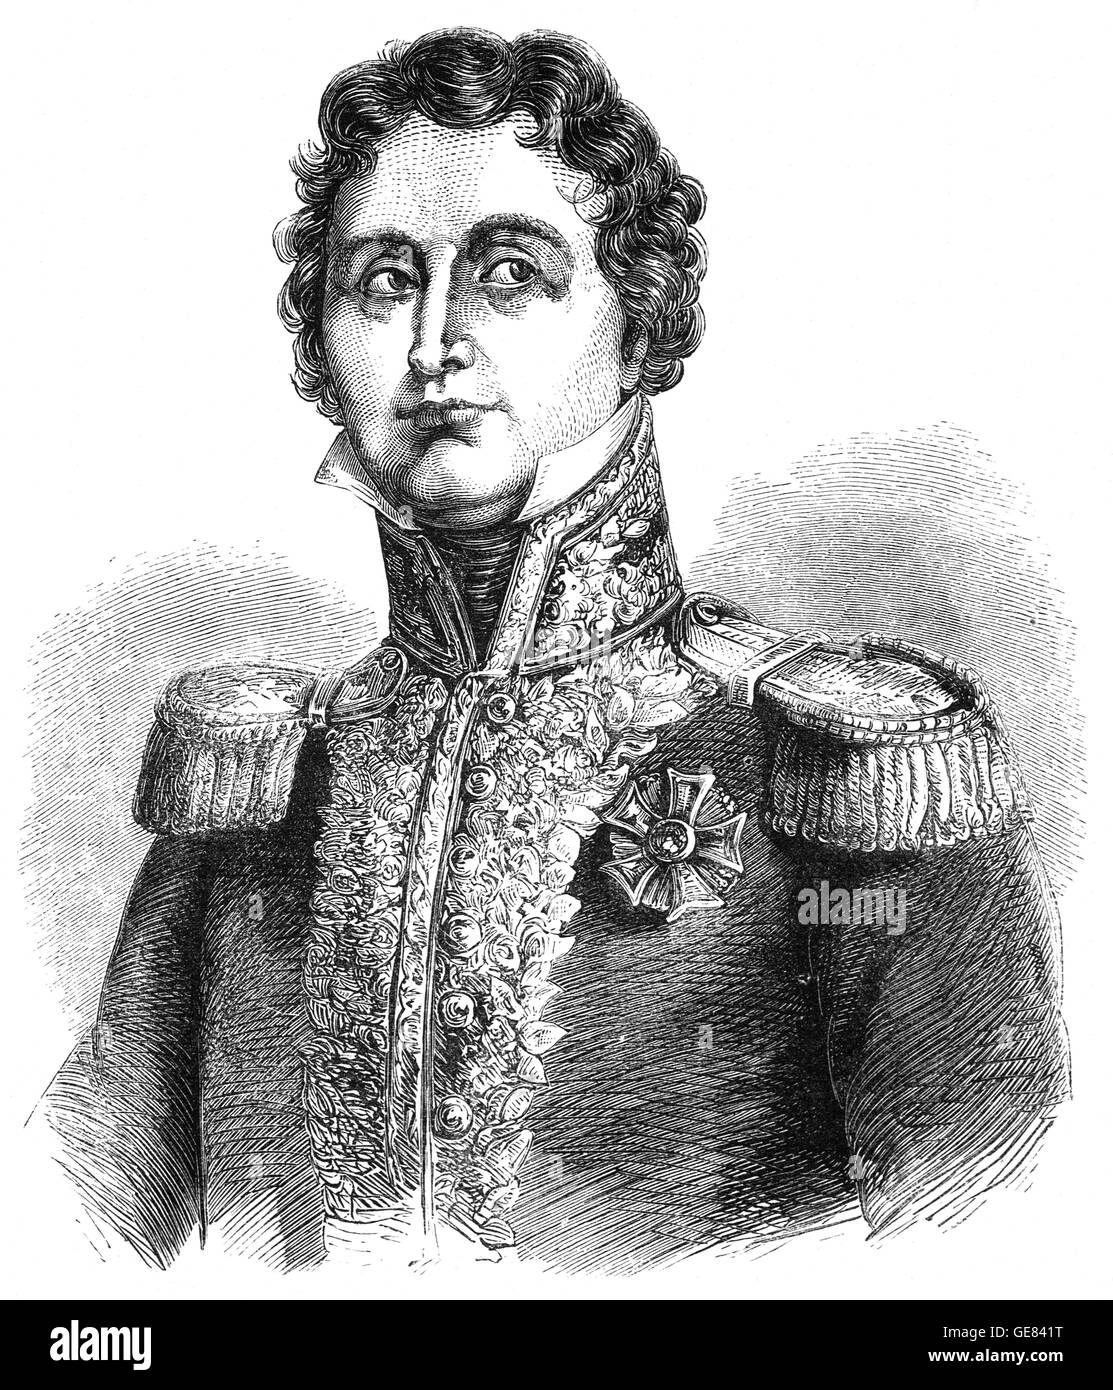 Marshal General Jean-de-Dieu Soult  (1769 – 1851), was a French general and statesman, named Marshal of the Empire in 1804 and often called Marshal Soult. He also served three times as President of the Council of Ministers, or Prime Minister of France. Stock Photo